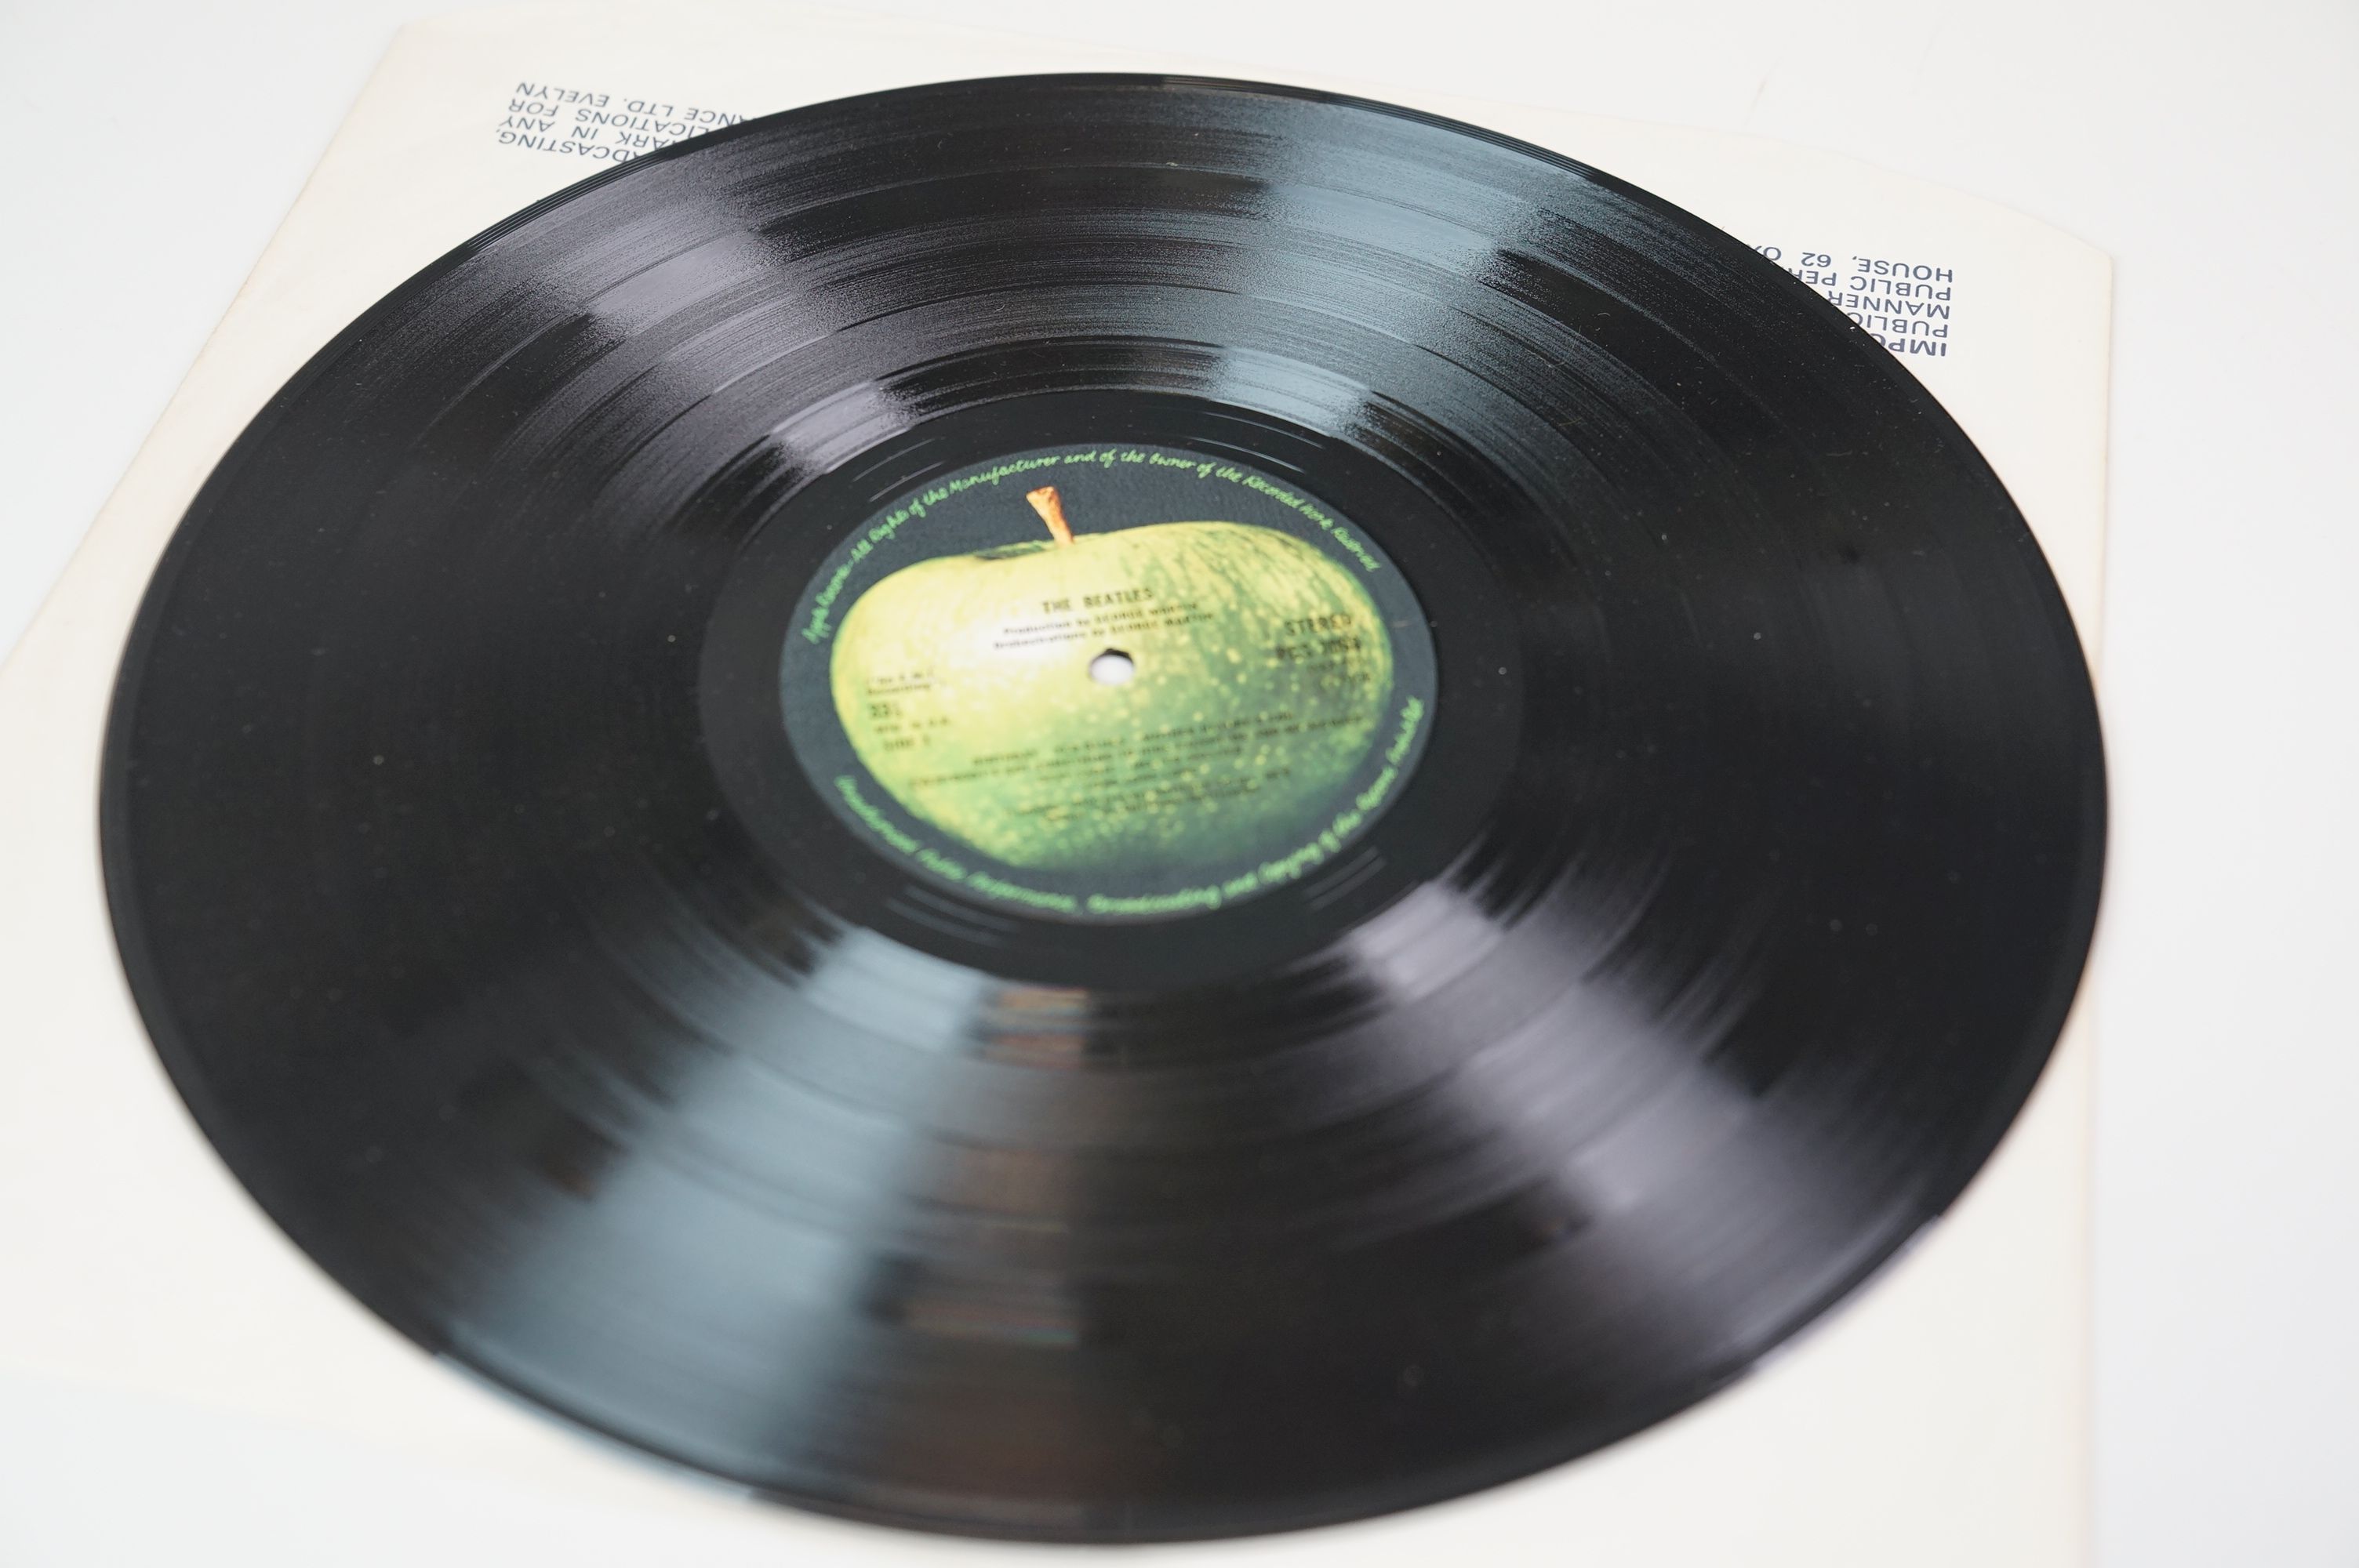 Vinyl - The Beatles White Album PCS7067/8 Stereo side opener no. 296130, 4 photographs and poster ex - Image 15 of 17